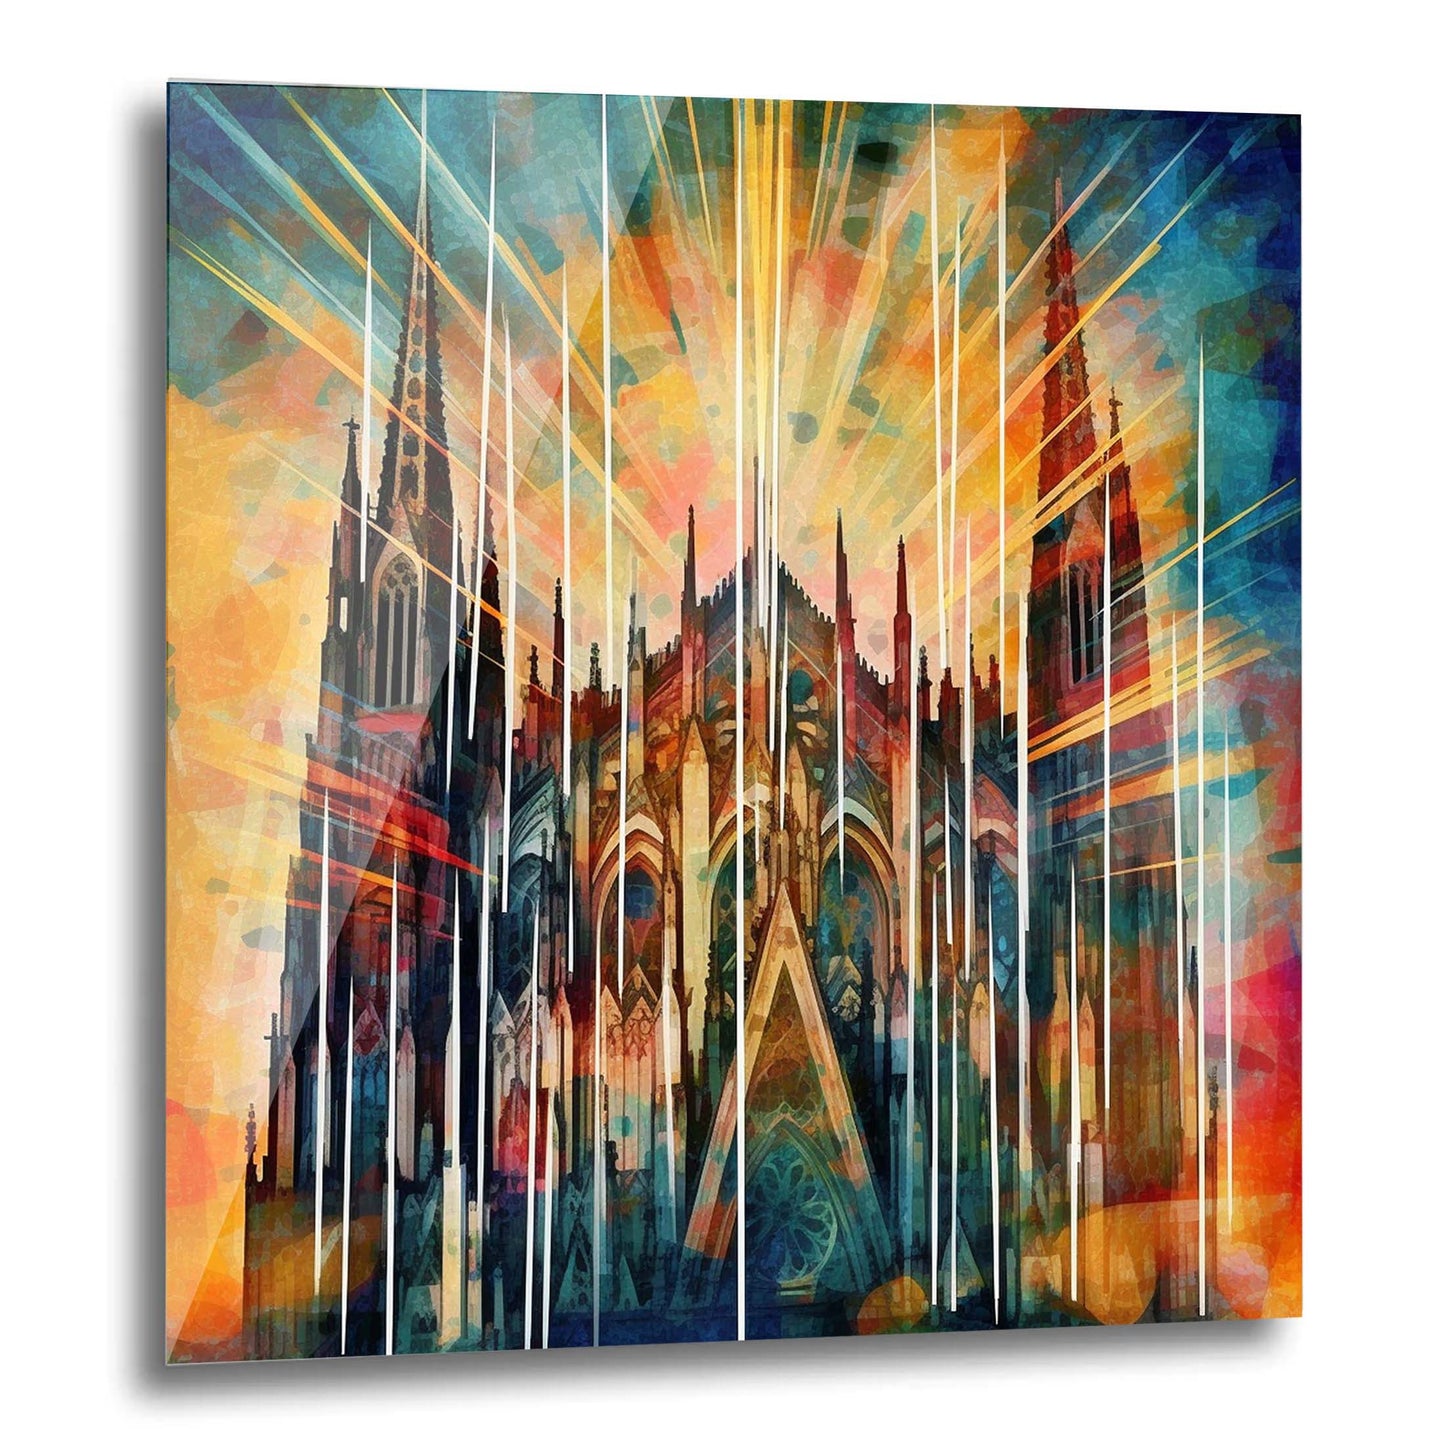 Cologne Cathedral - mural in the style of futurism